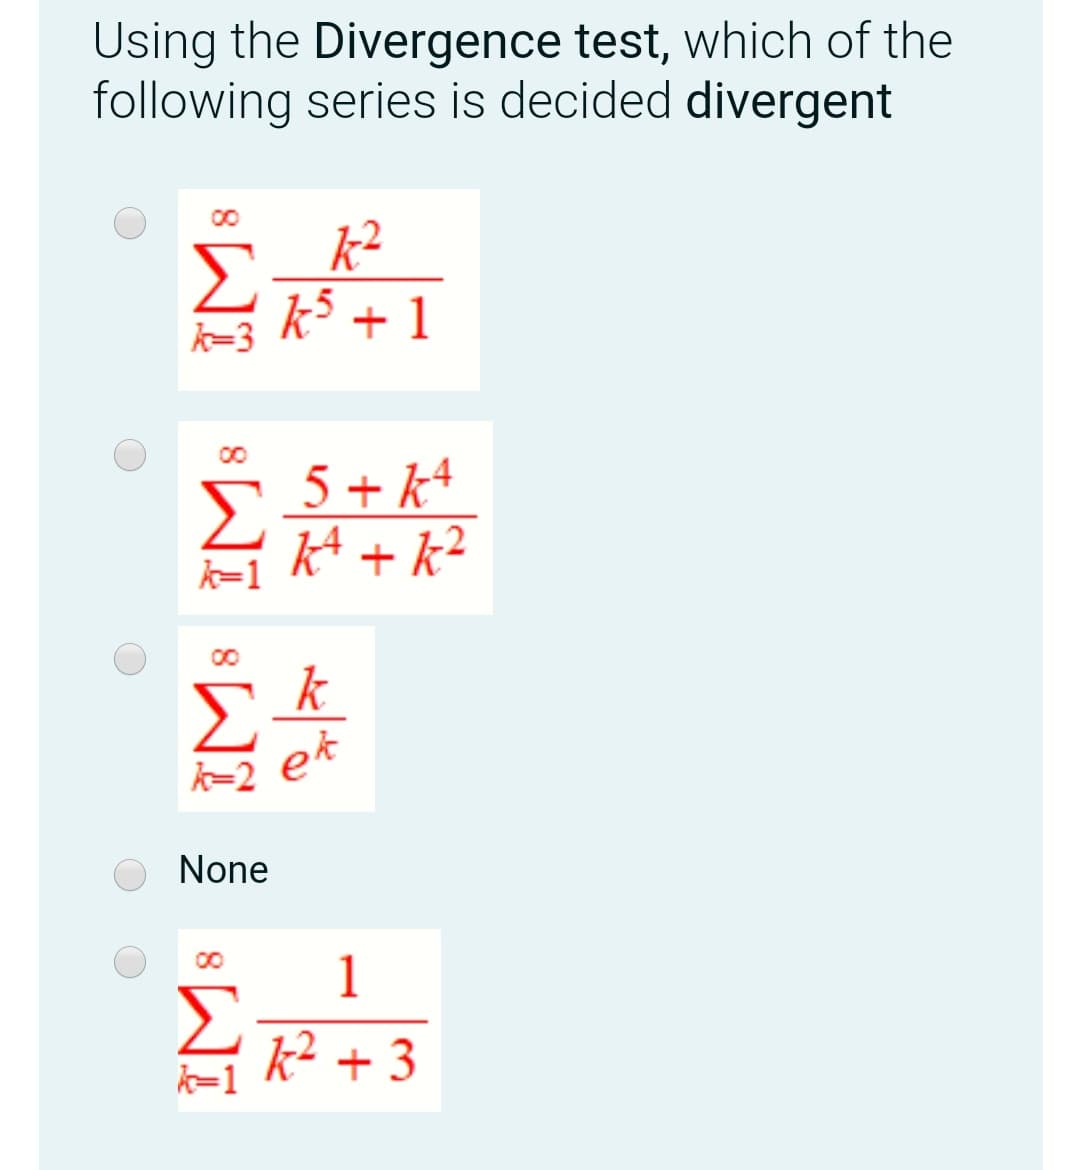 Using the Divergence test, which of the
following series is decided divergent
00
k²
Σ
k³ + 1
5 + k4
kA + k²
k=
k
et
None
00
1
k² + 3
8WI
